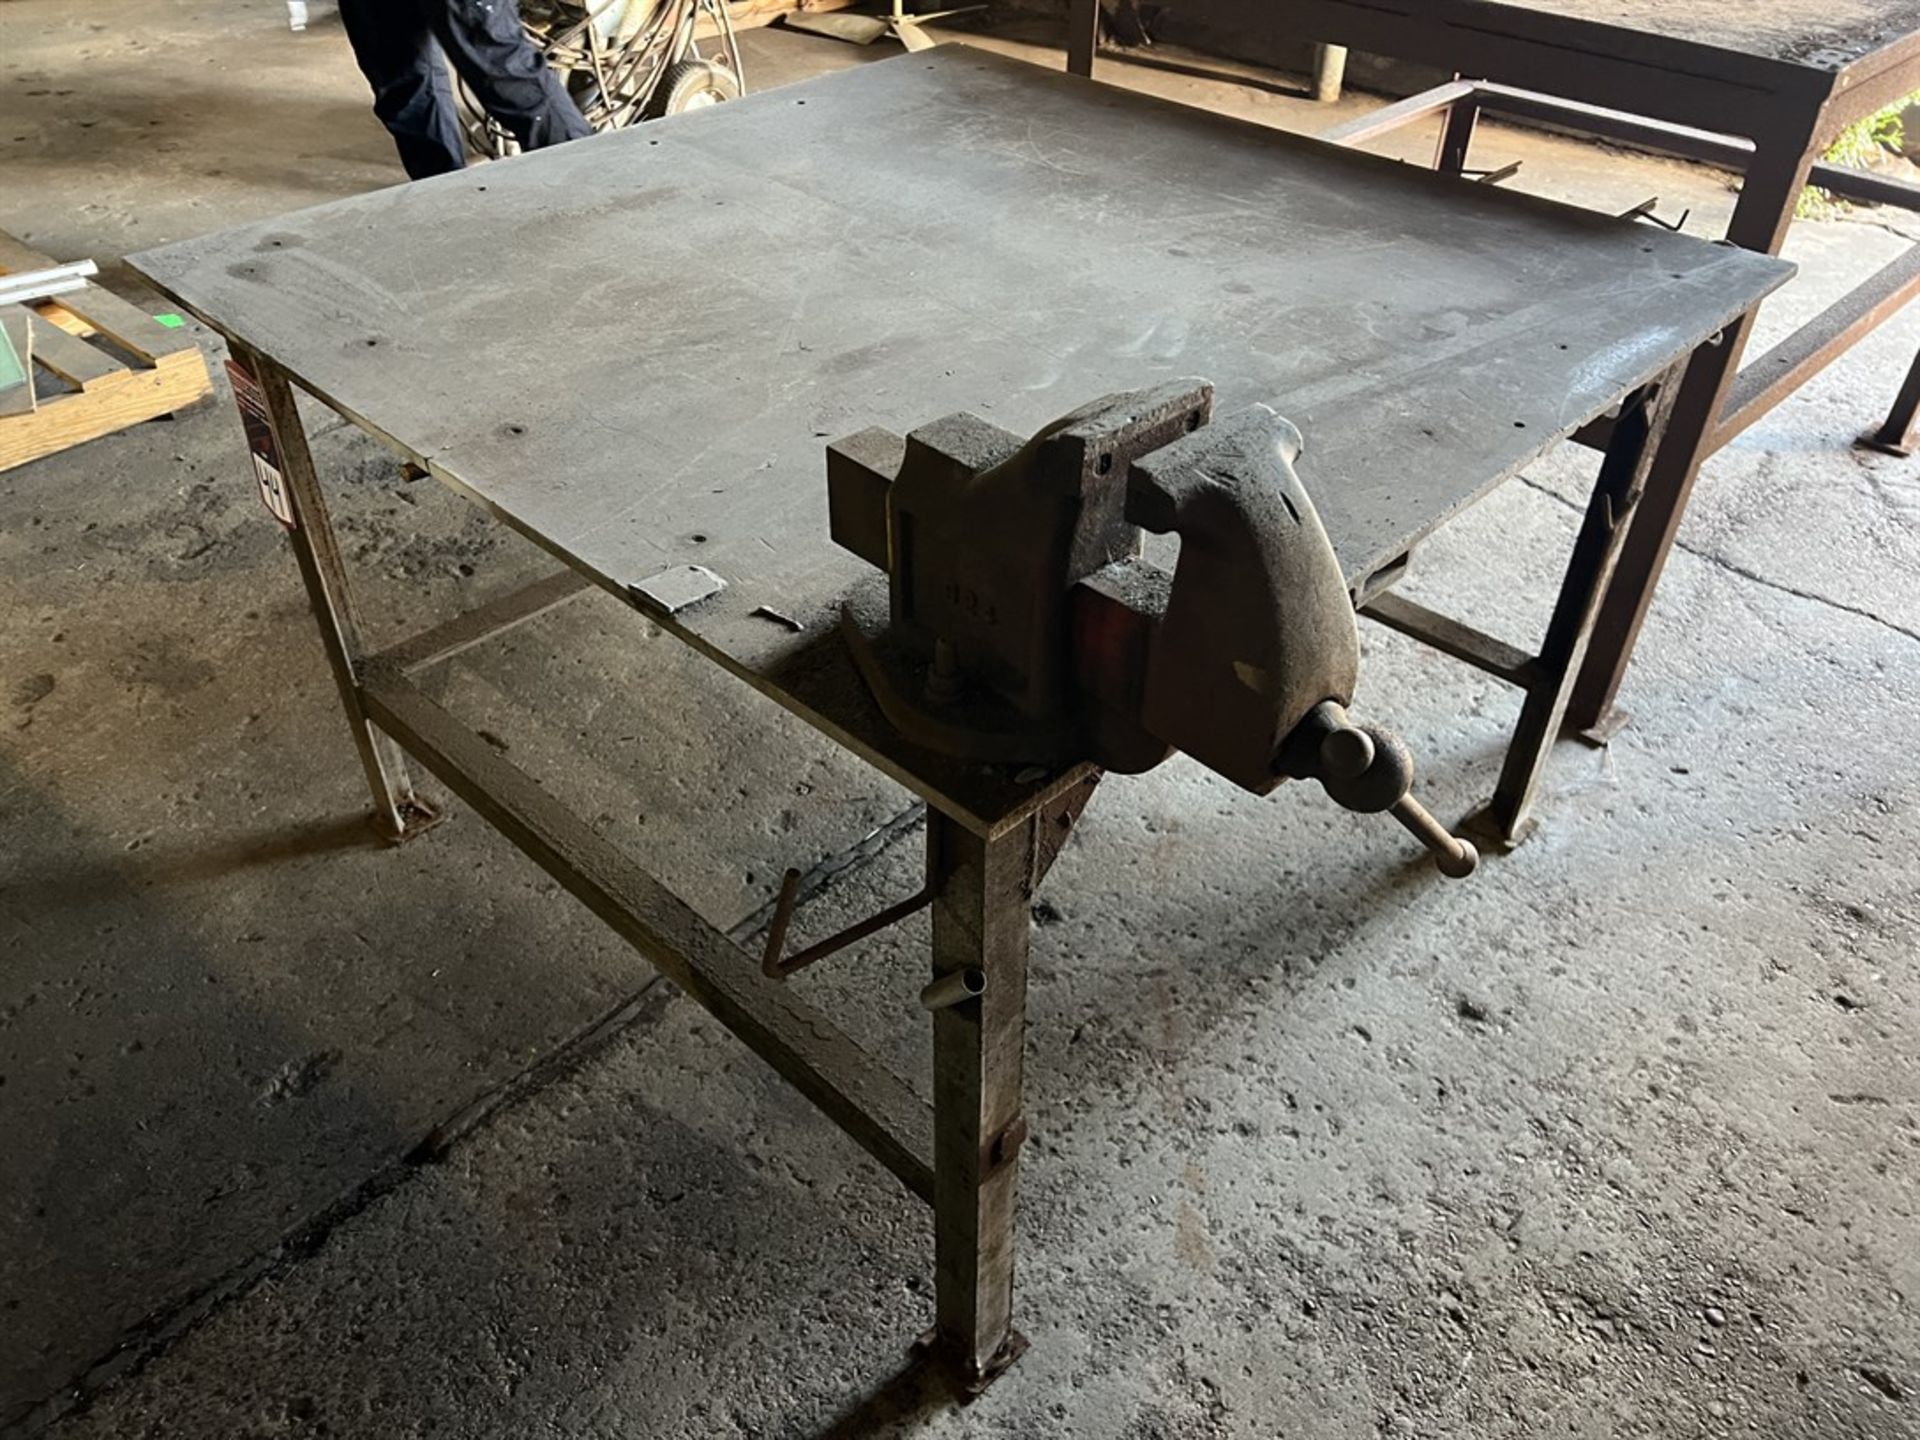 Steel Table, 4' x 4', w/ATHOL 4" Bench Vise (Building 39) - Image 2 of 3